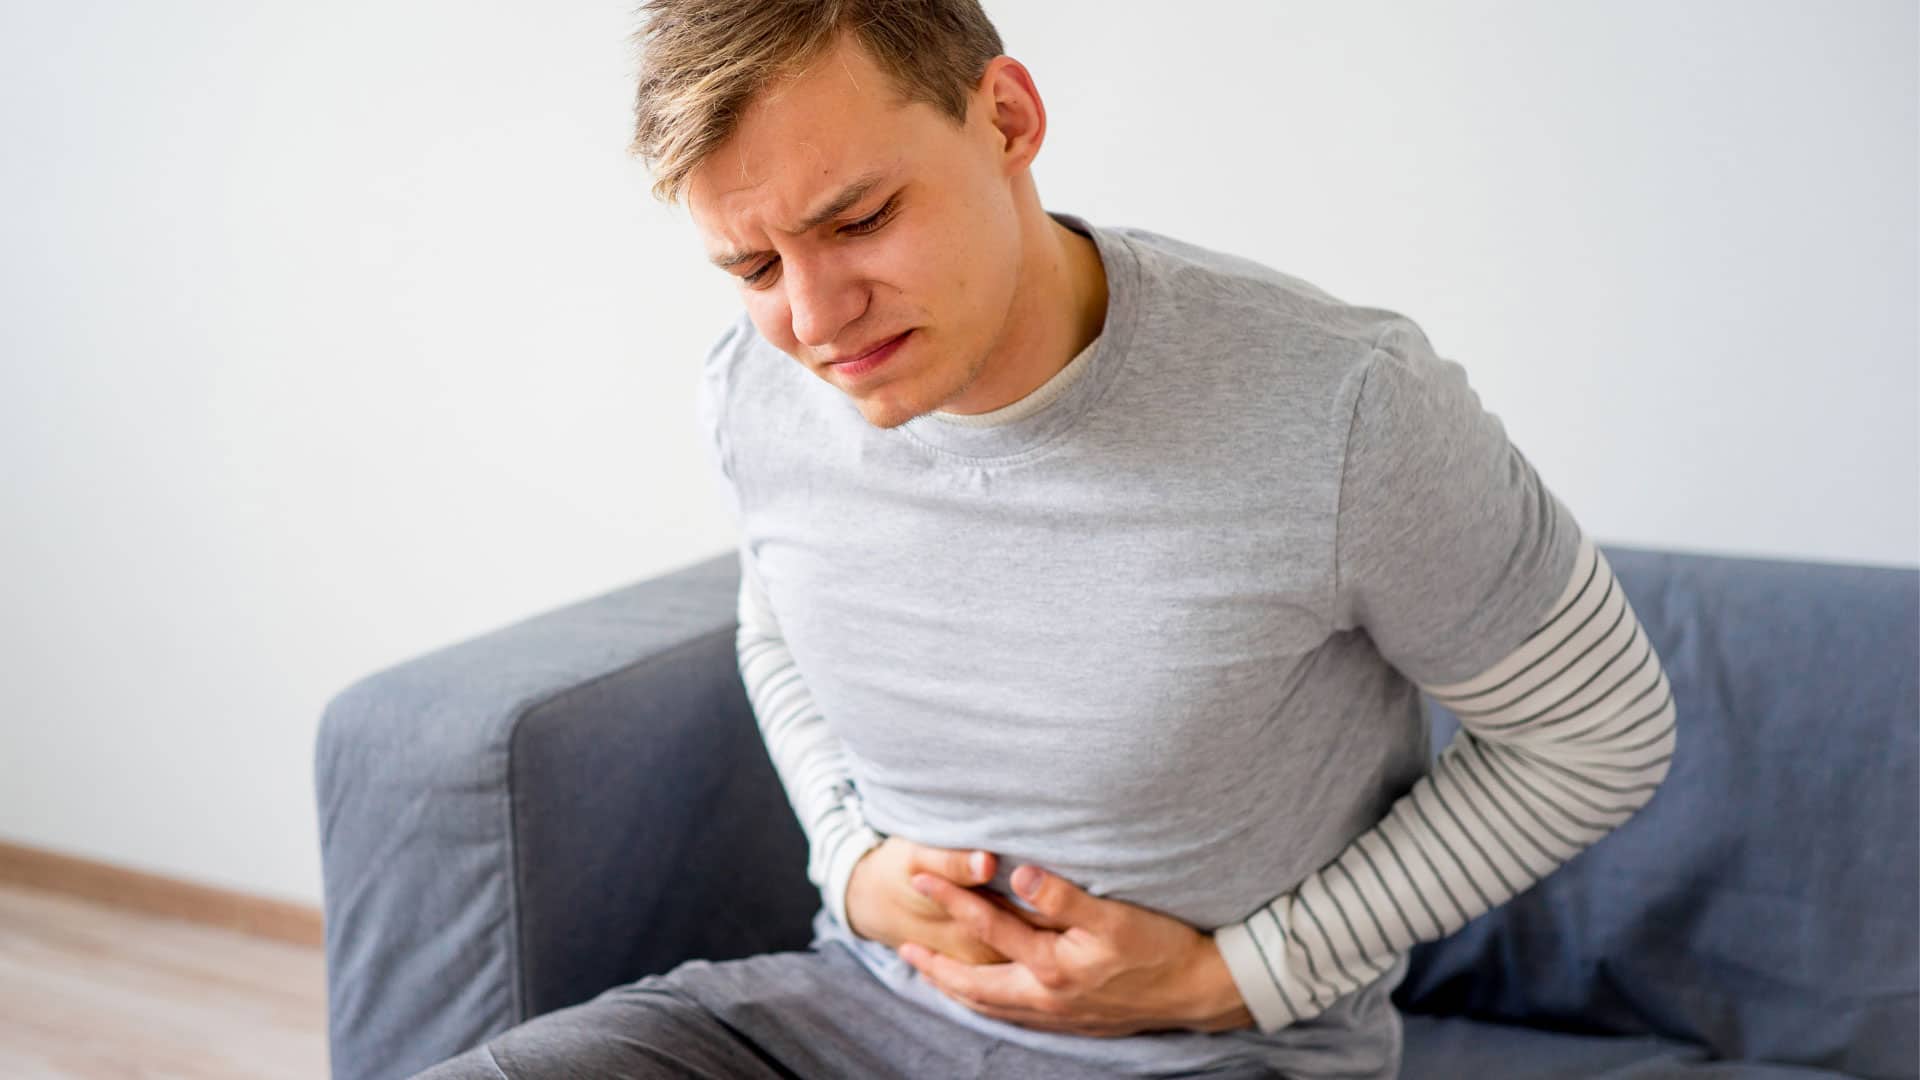 What to do with an irritable bowel